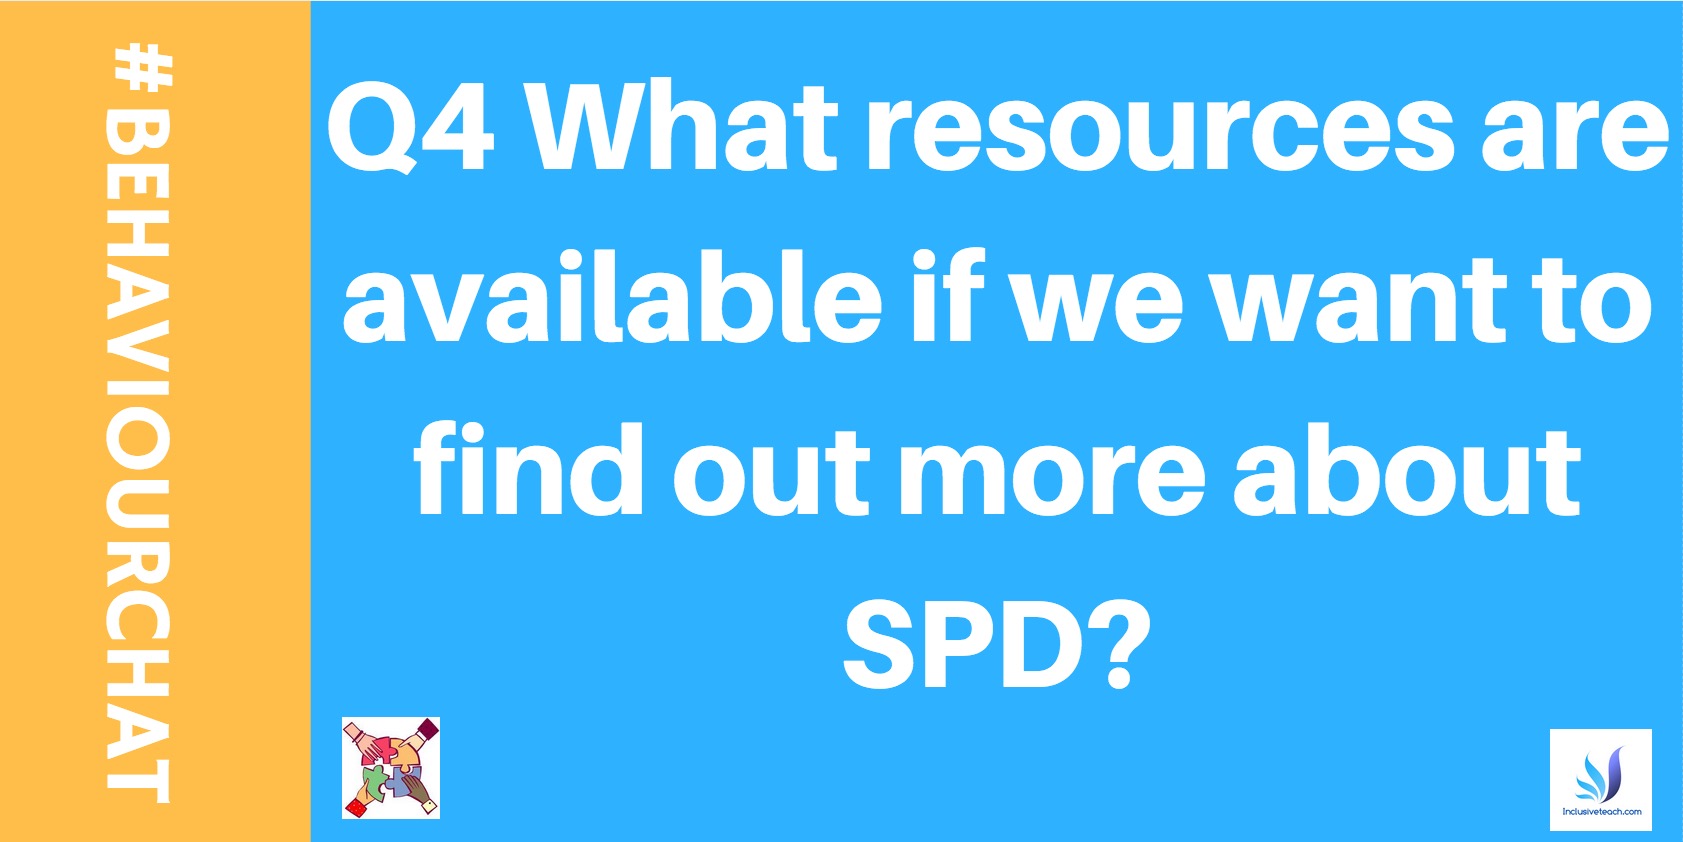 What Resources Are Available to Learn More About SPD?